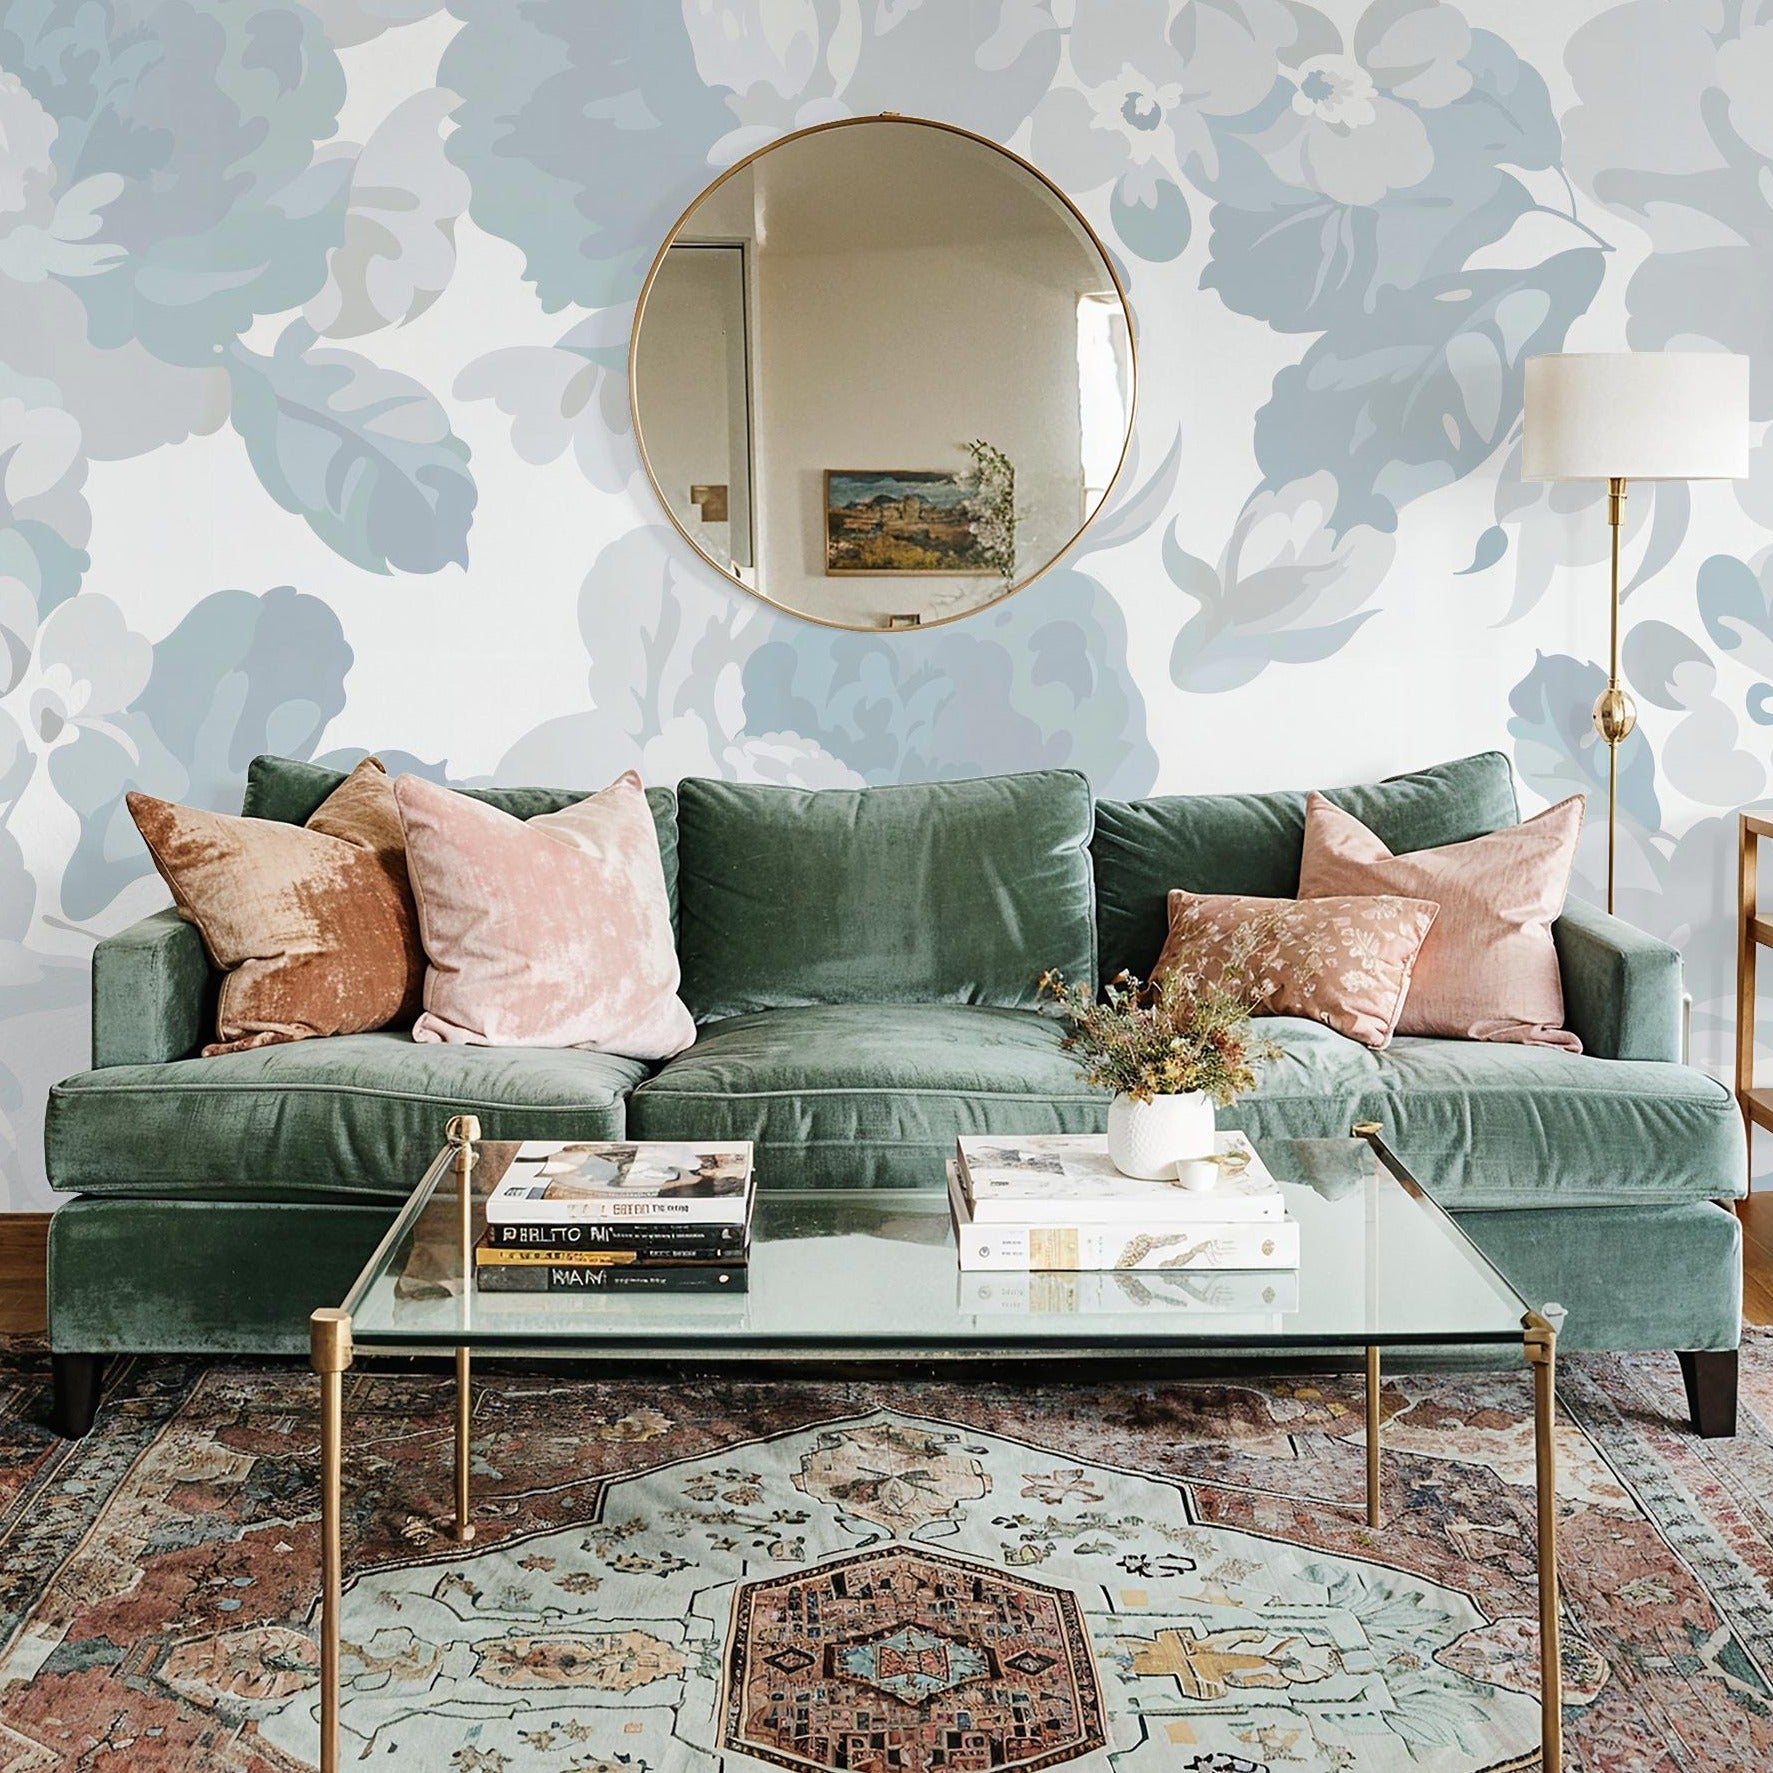 Terra Bloom Wallpaper by Wall Blush in a stylish living room with focus on design.